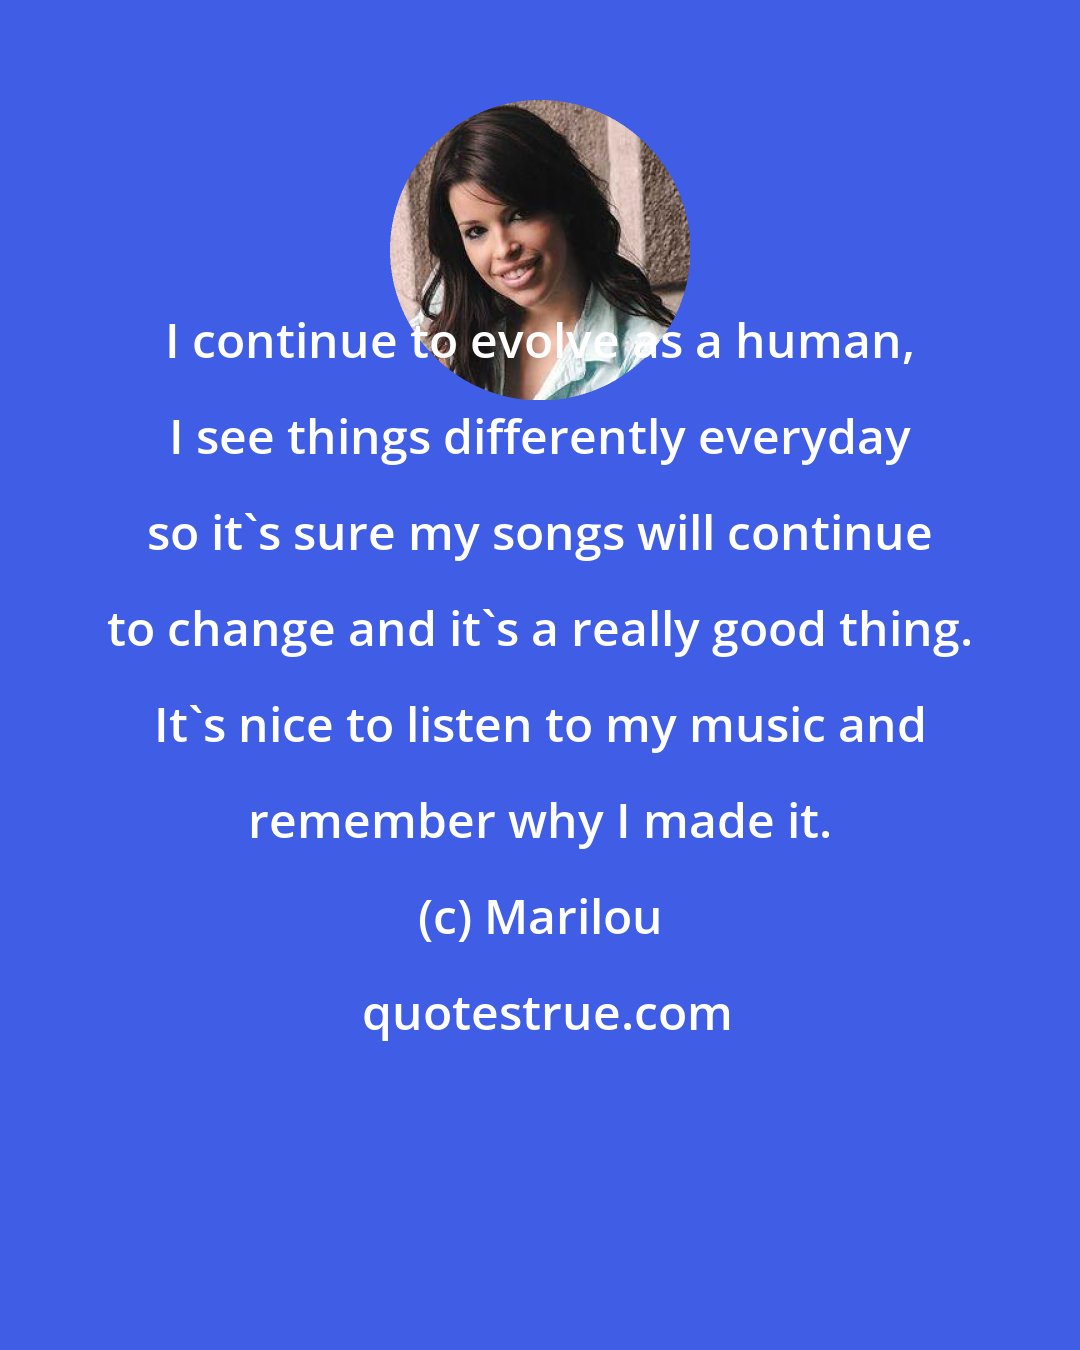 Marilou: I continue to evolve as a human, I see things differently everyday so it's sure my songs will continue to change and it's a really good thing. It's nice to listen to my music and remember why I made it.